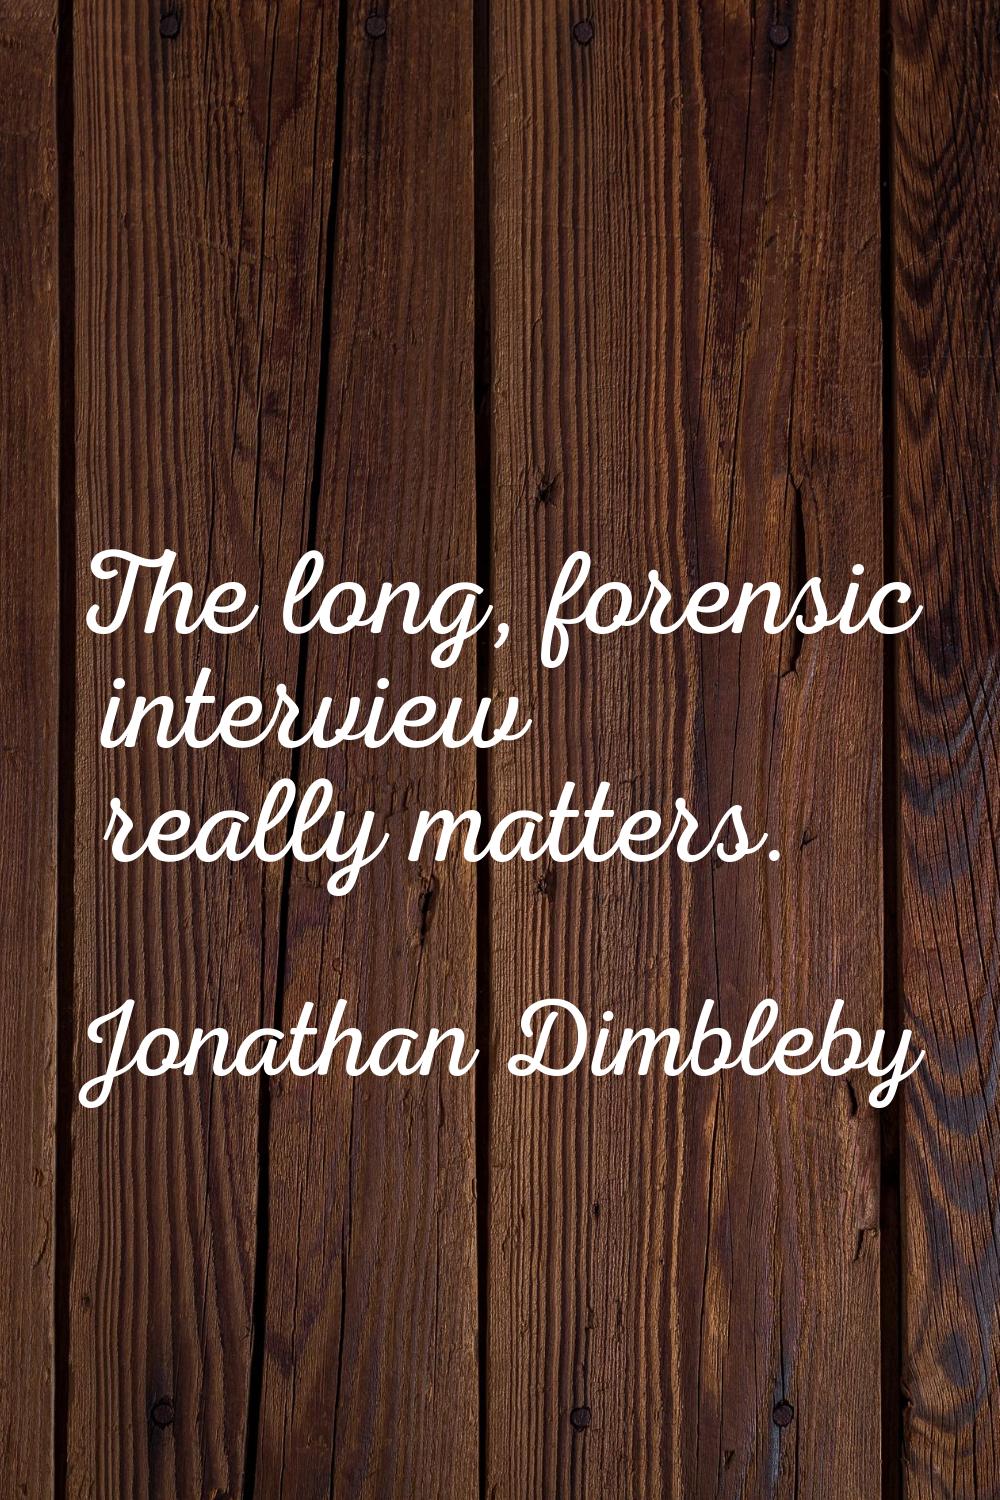 The long, forensic interview really matters.